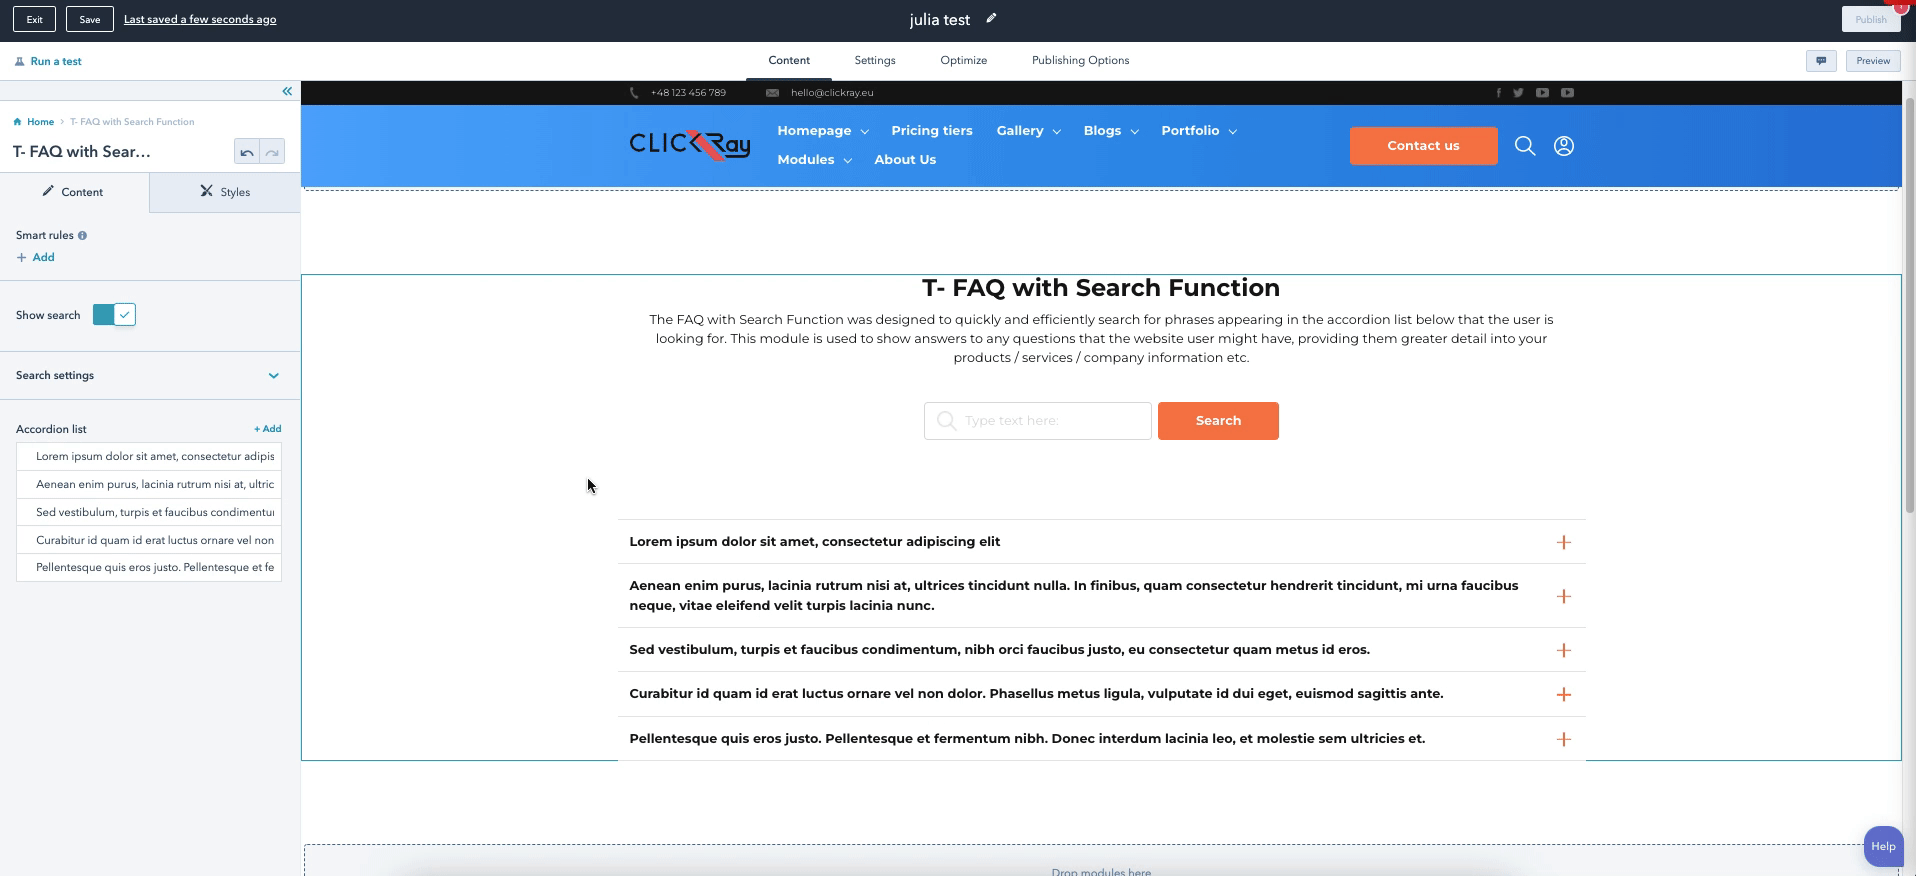 T- FAQ with Search Function